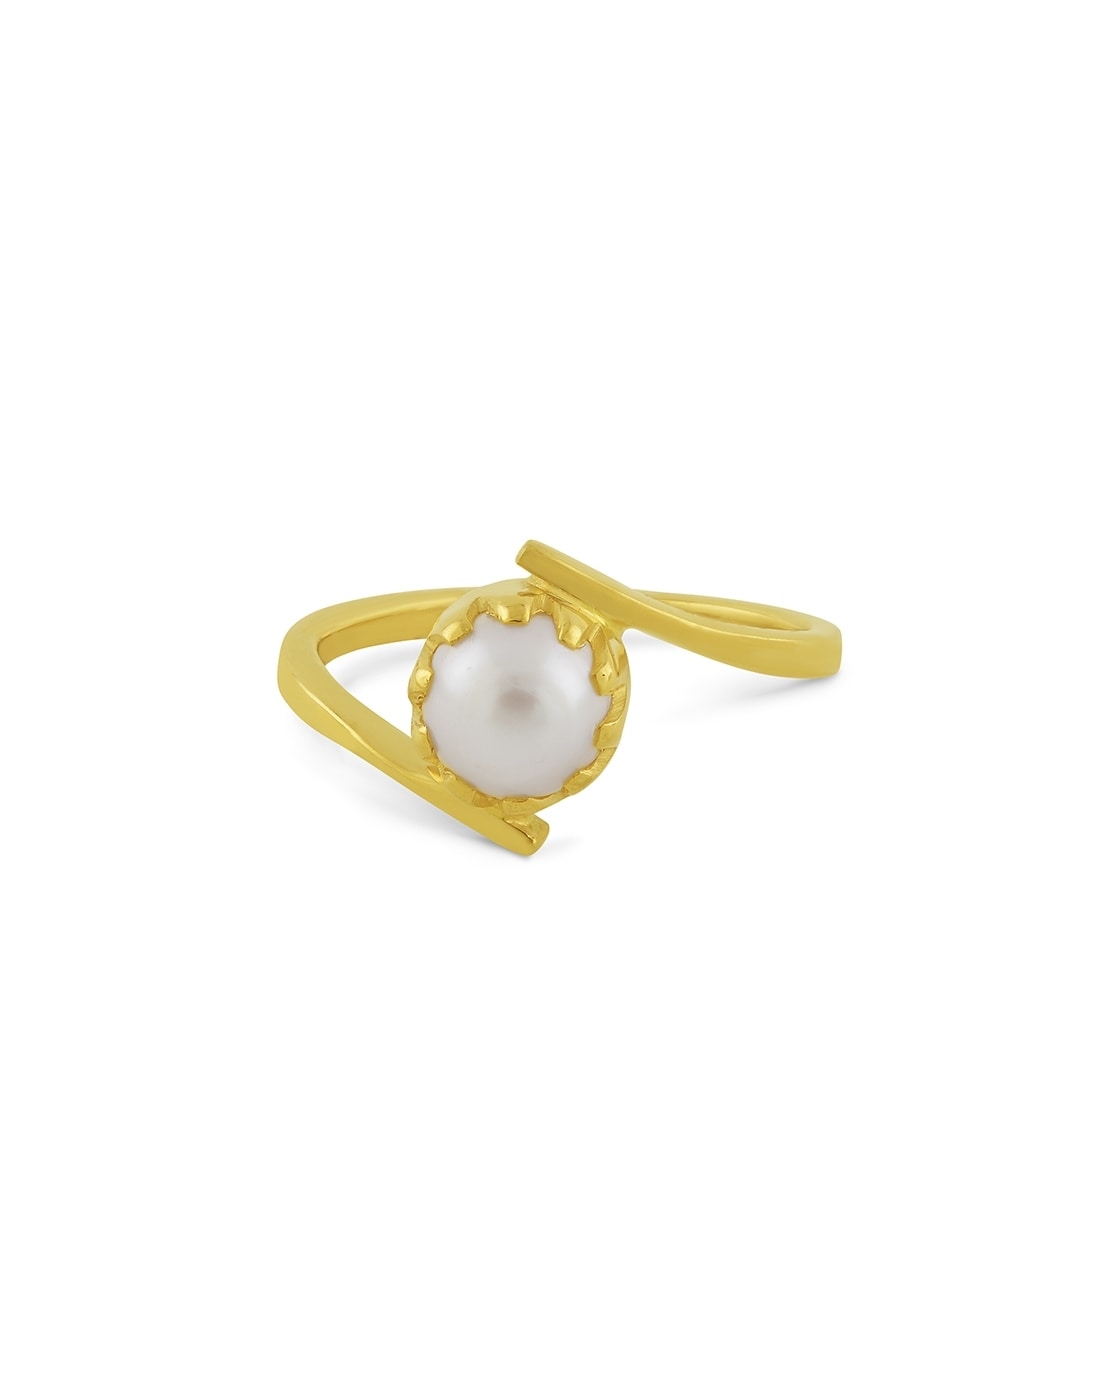 235-GR5985 - 22K Gold Ring For Women with Pearl | Gold ring designs, Gold  rings, Gold rings fashion